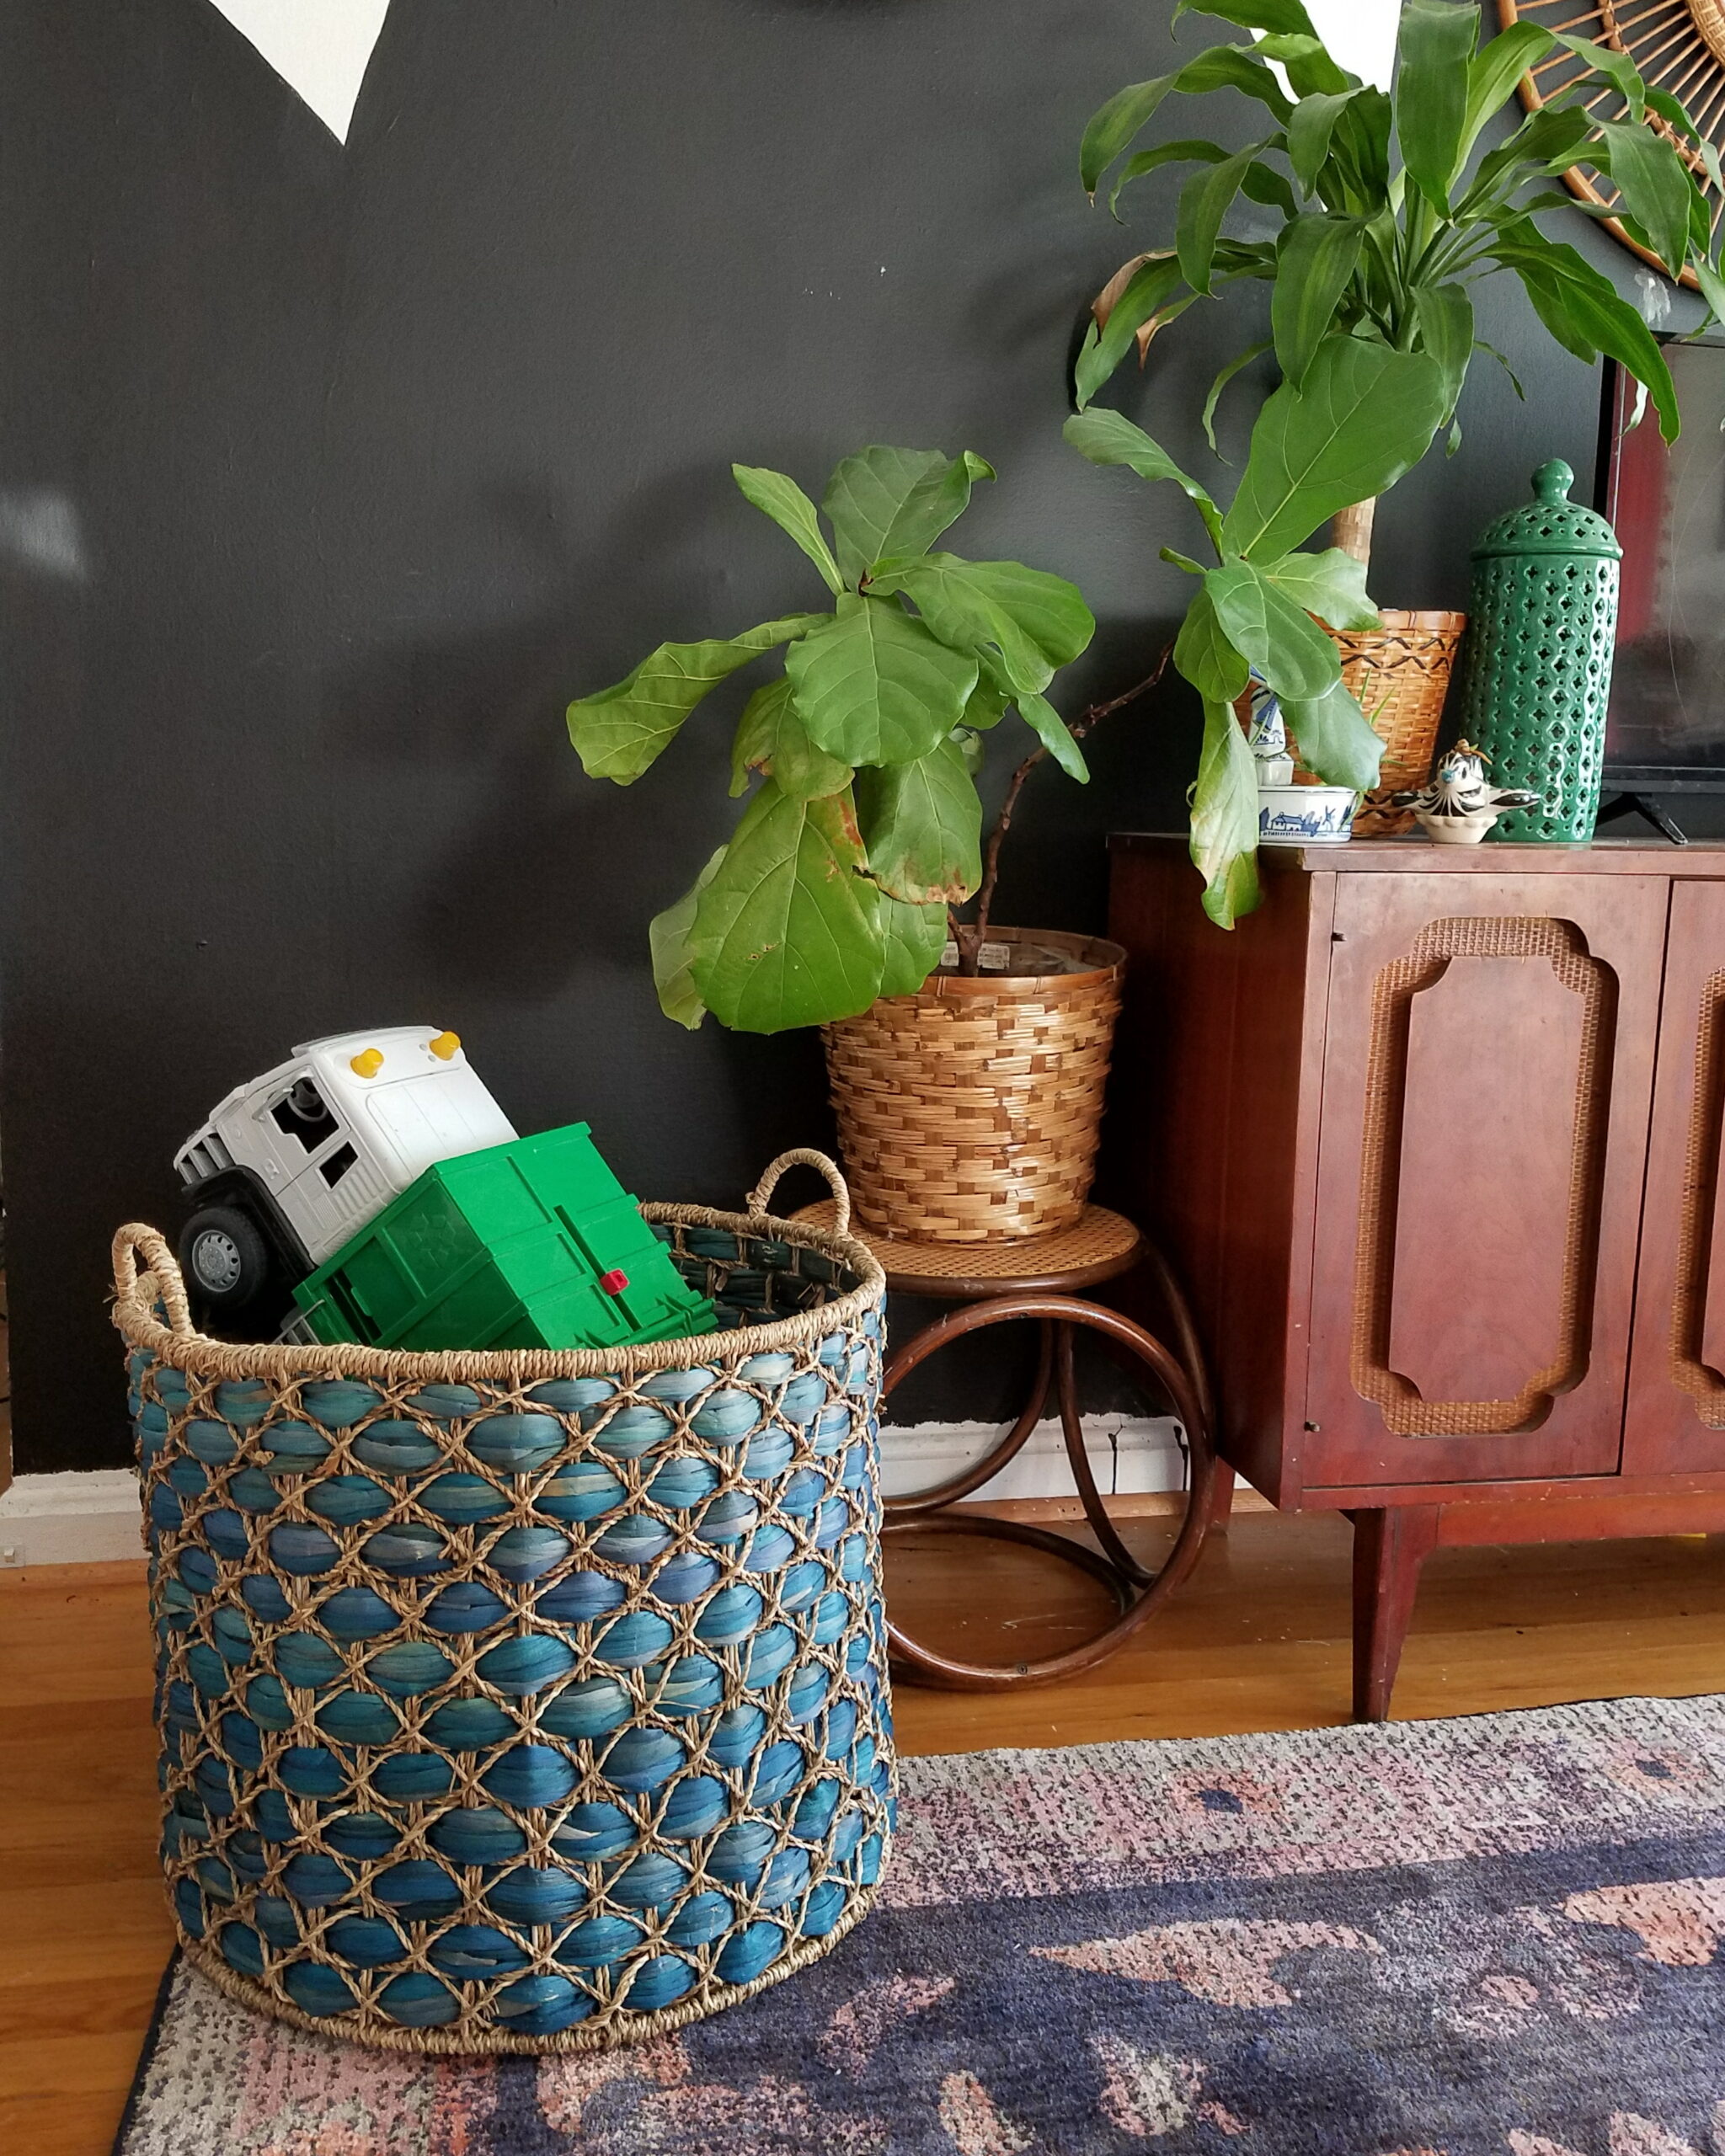 Giant Basket = Giant toy storage for all the indoor play during cooler months like Fall and Winter